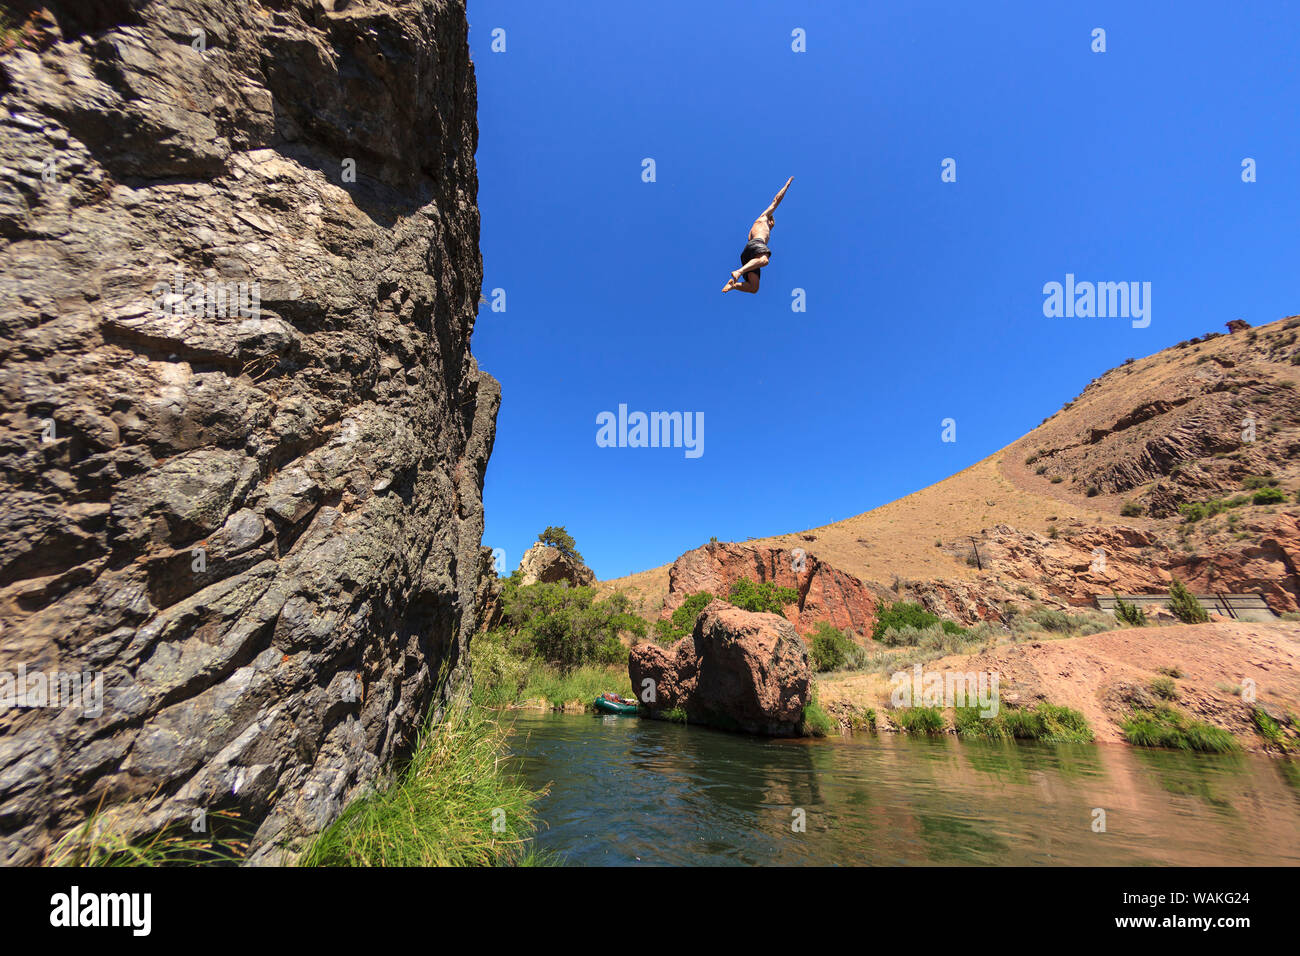 Cliff jumping near Warm Springs Road, Lower Deschutes River, Central Oregon, USA (MR) Stock Photo